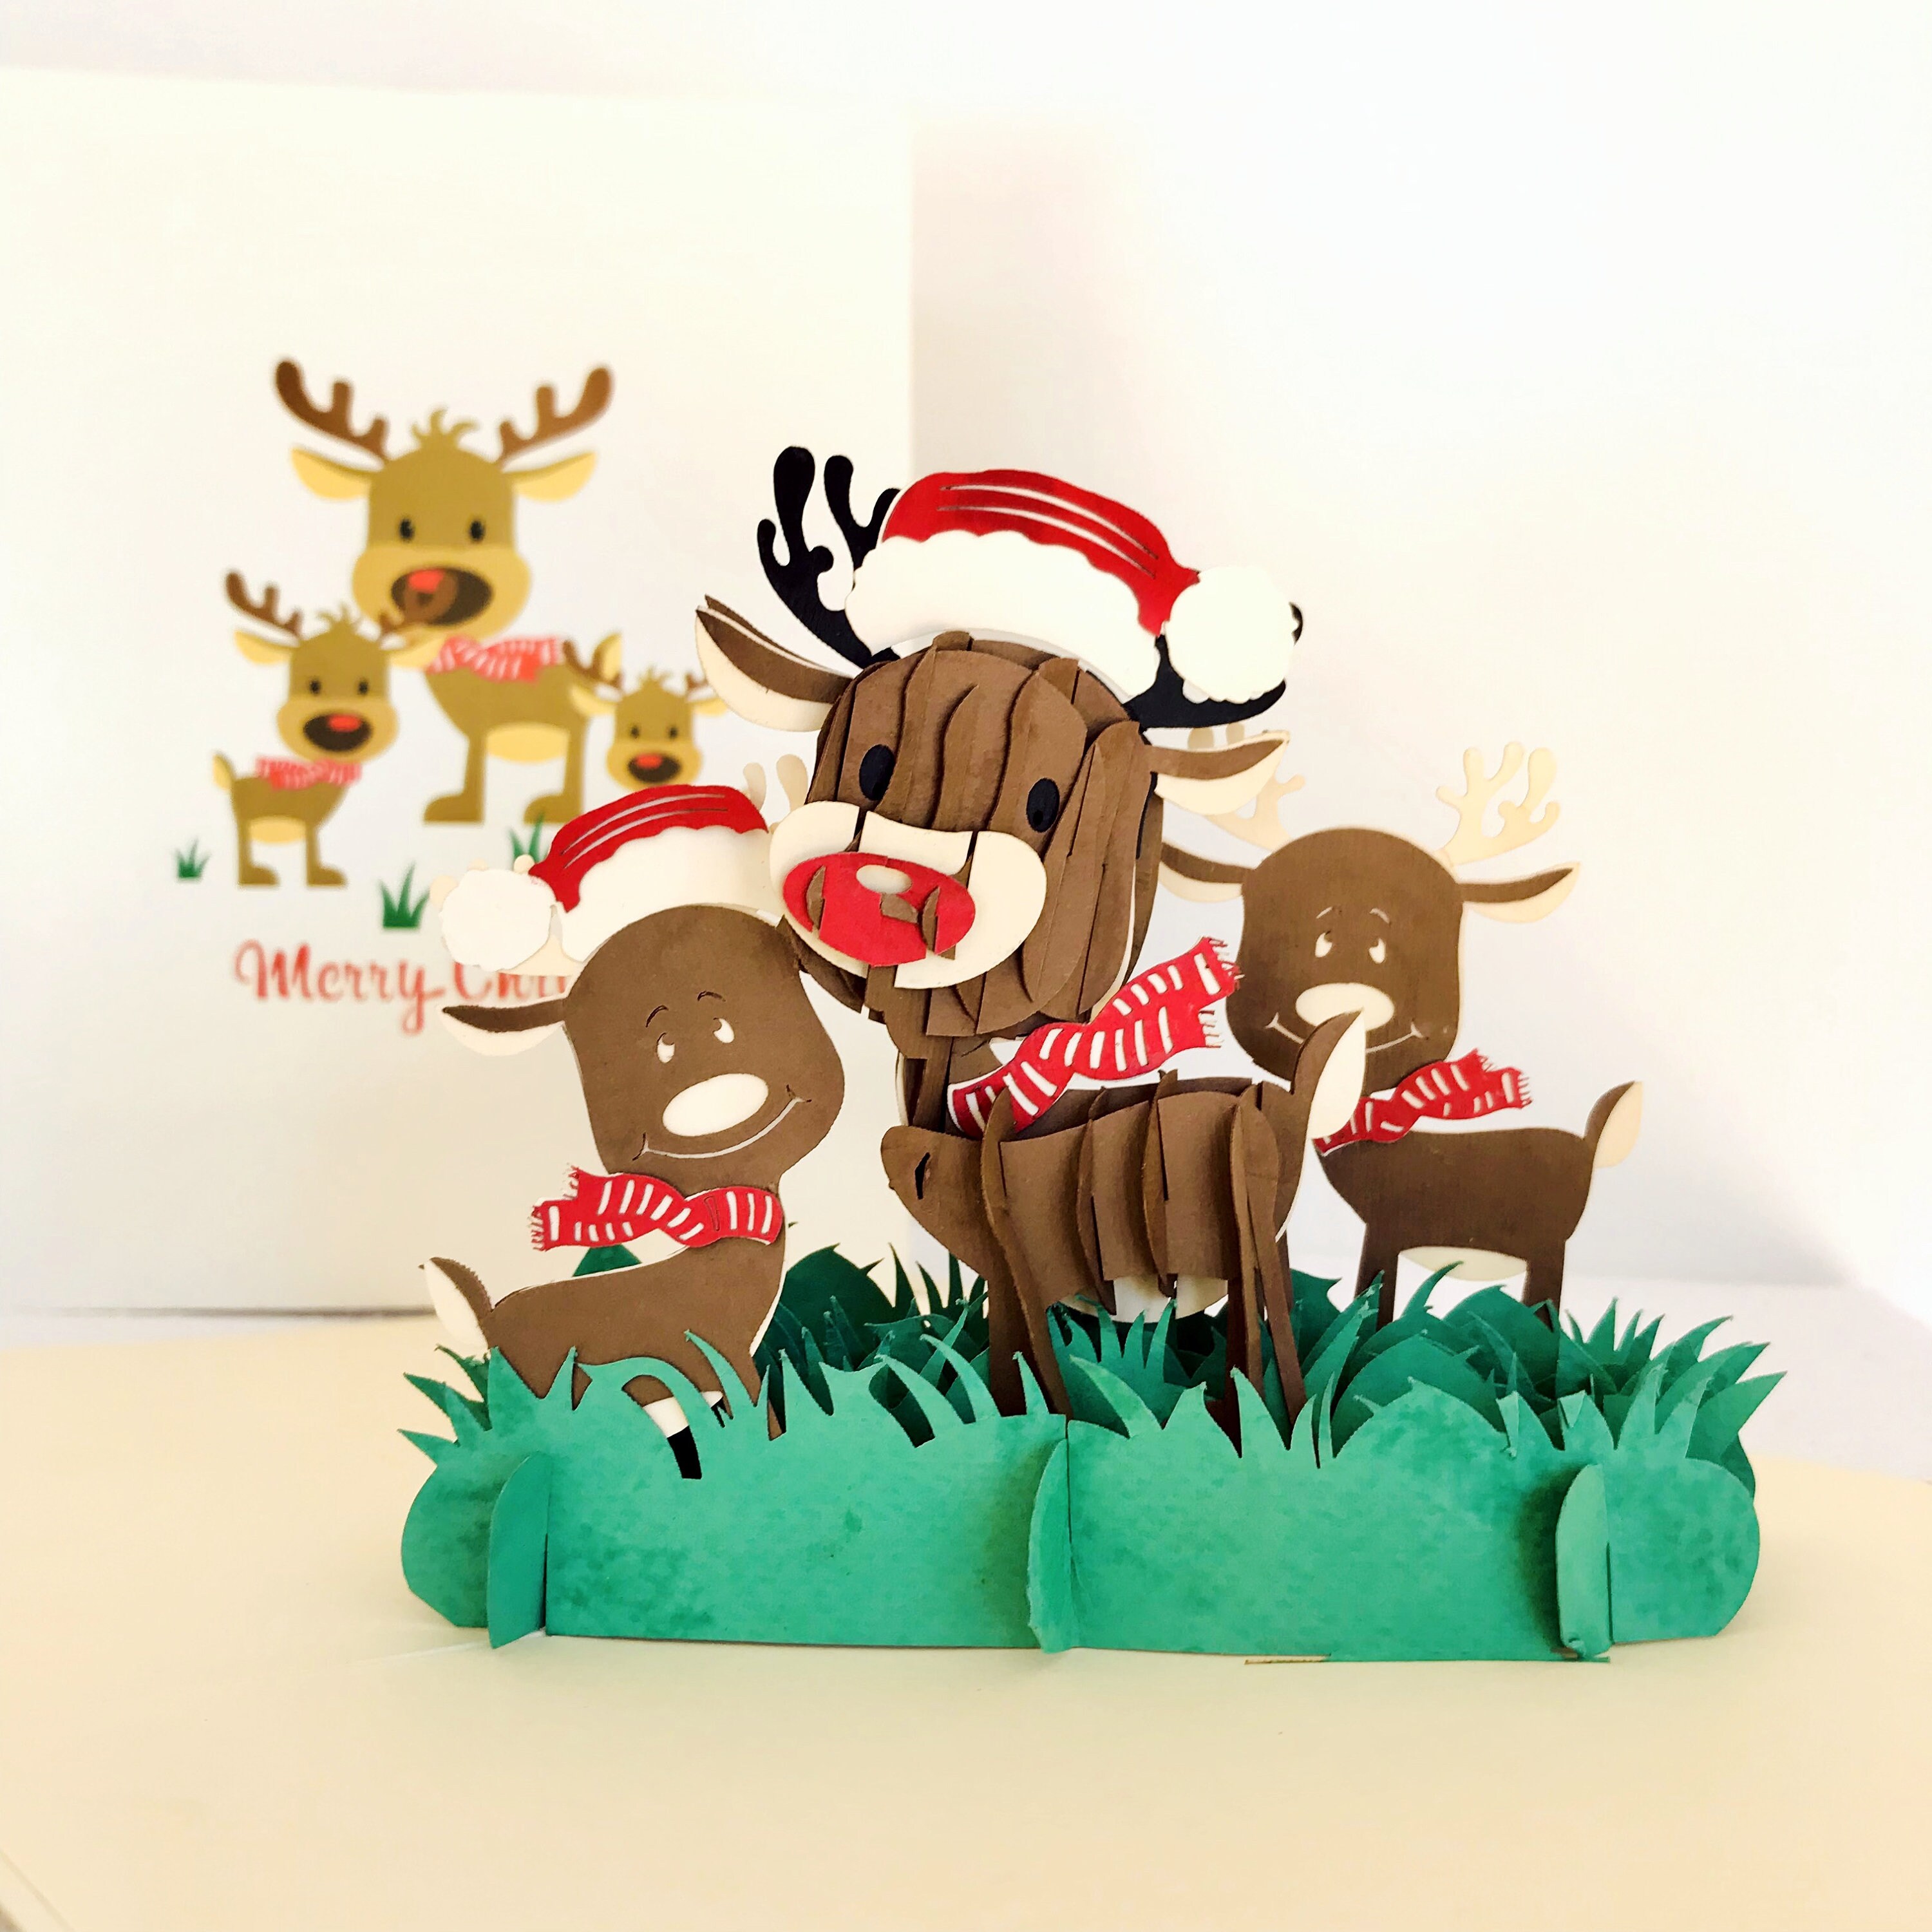 Christmas Bear and Reindeer 3D Pop Up card friends A Delightful holiday surprise greeting card gift for kids For Christmas decor and parties.15cmx15cm family and loved ones